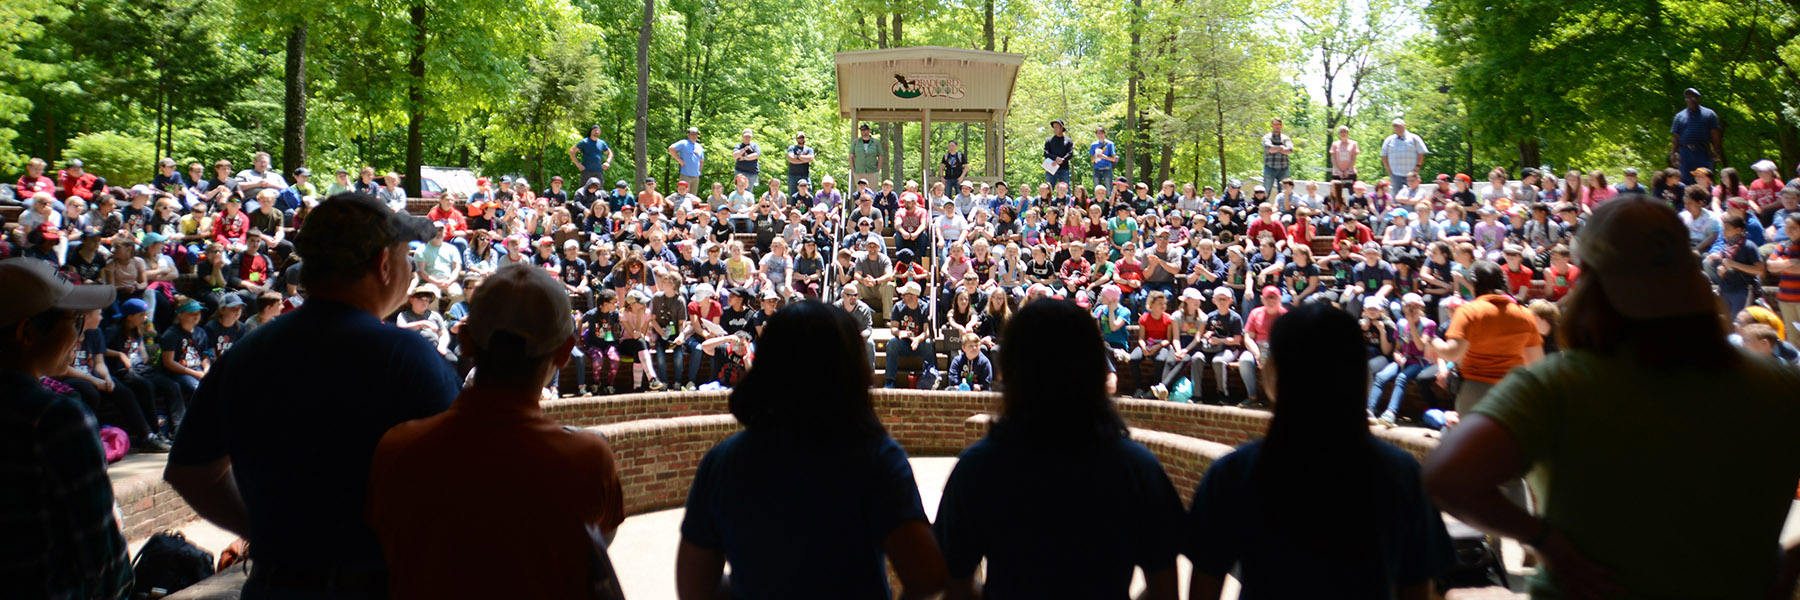 Staff members stand in front of a crowd of students at the amphitheater.